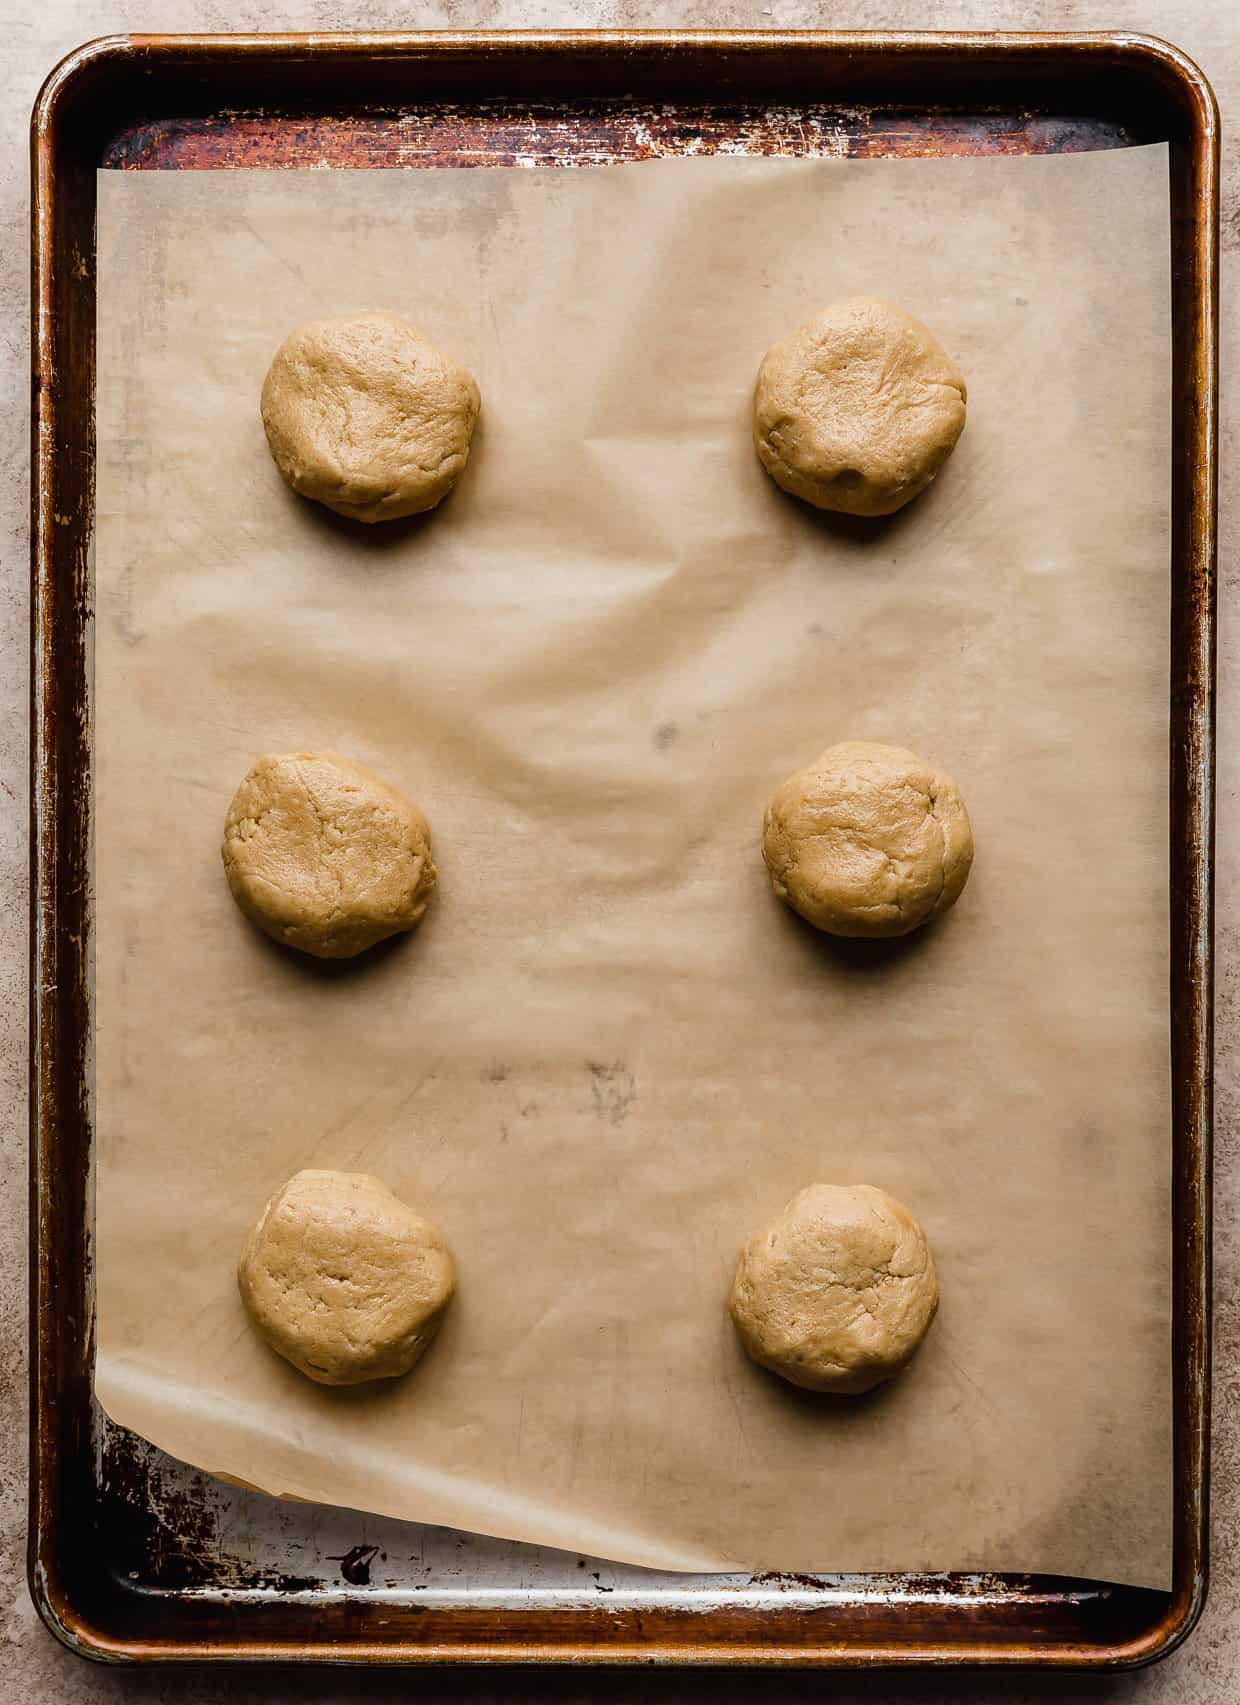 Six peanut butter cookie dough balls on a tan parchment lined baking sheet ready to make muddy buddy crumbl cookies.